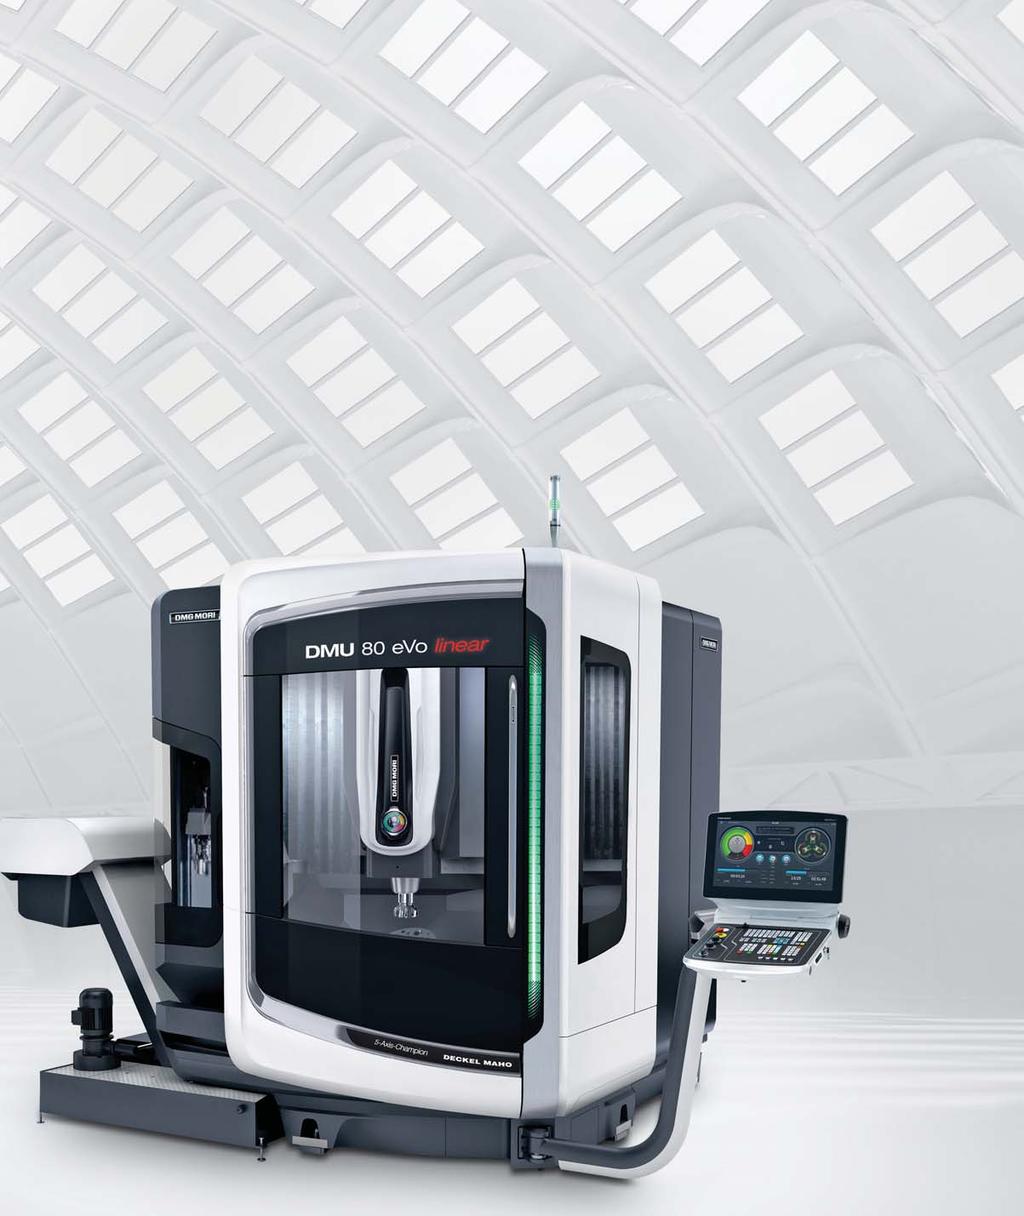 DMU 40 / 60 / 80 evo highlights + The revolutionary machine design brings unmatched rigidity and precision as well as impressive accessibility with the largest work area - all on a compact footprint